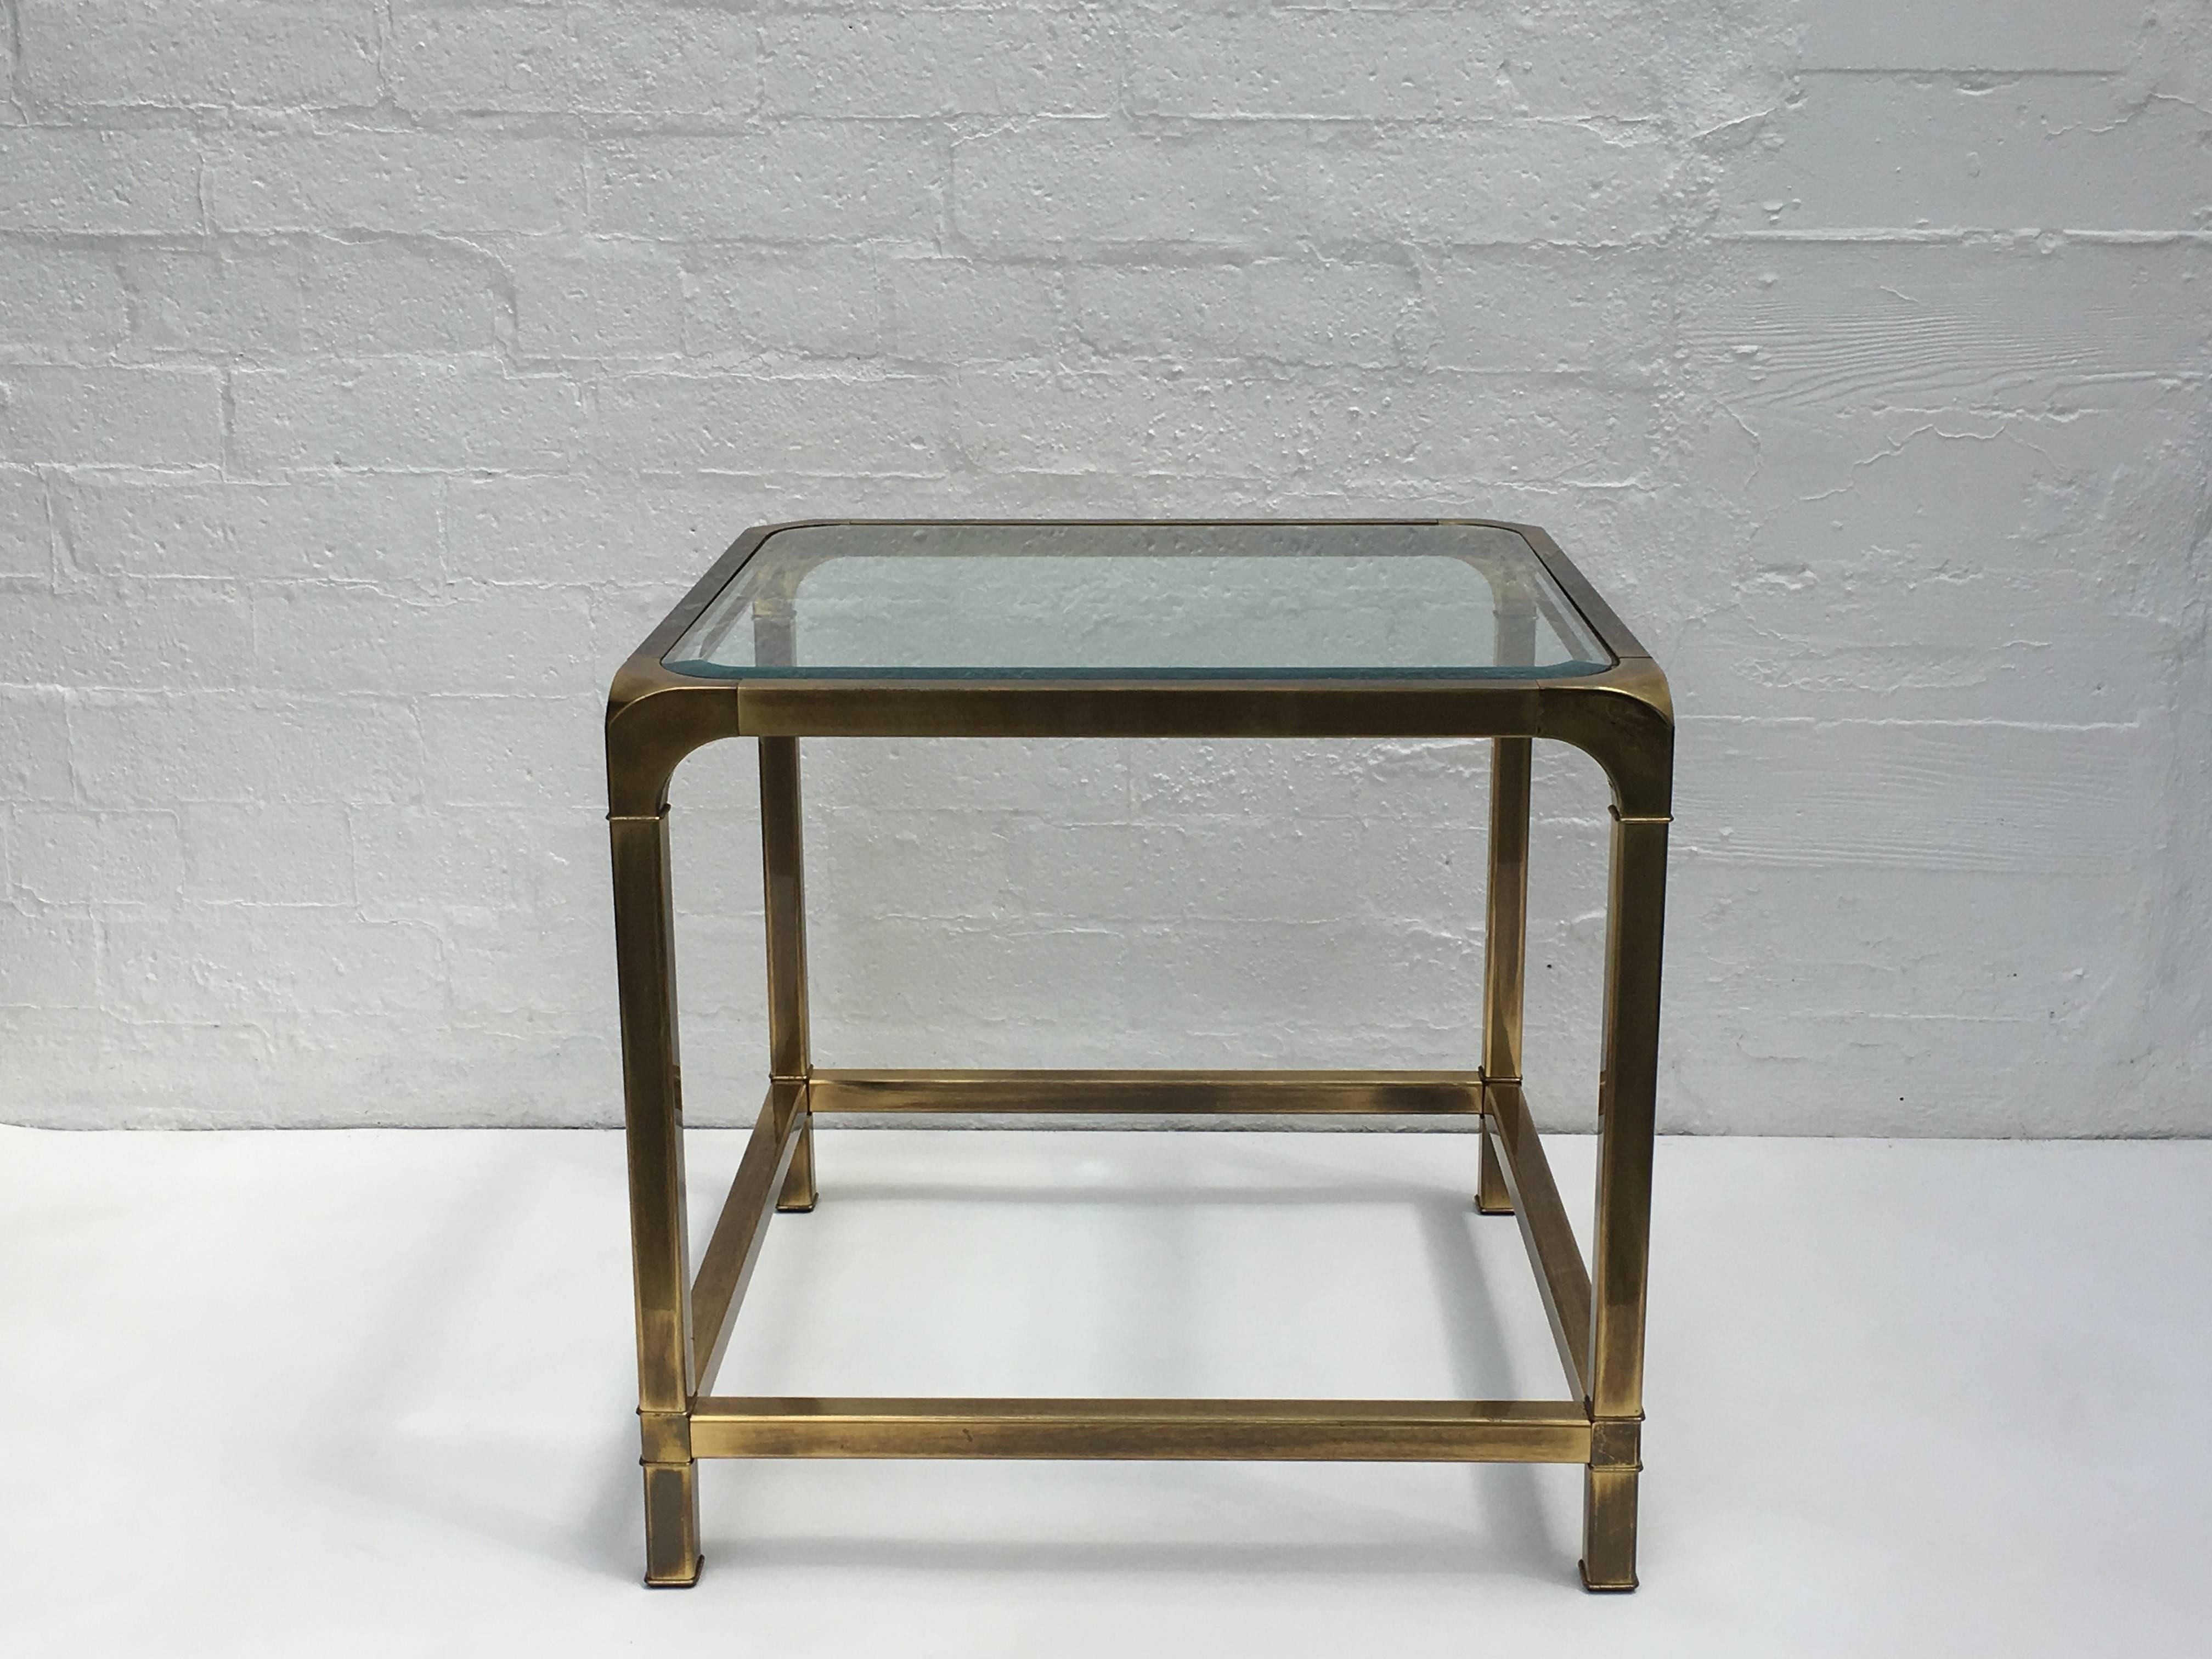 A beautiful aged brass end table with a beveled glass top insert. Design by Mastercraft in the 1970s